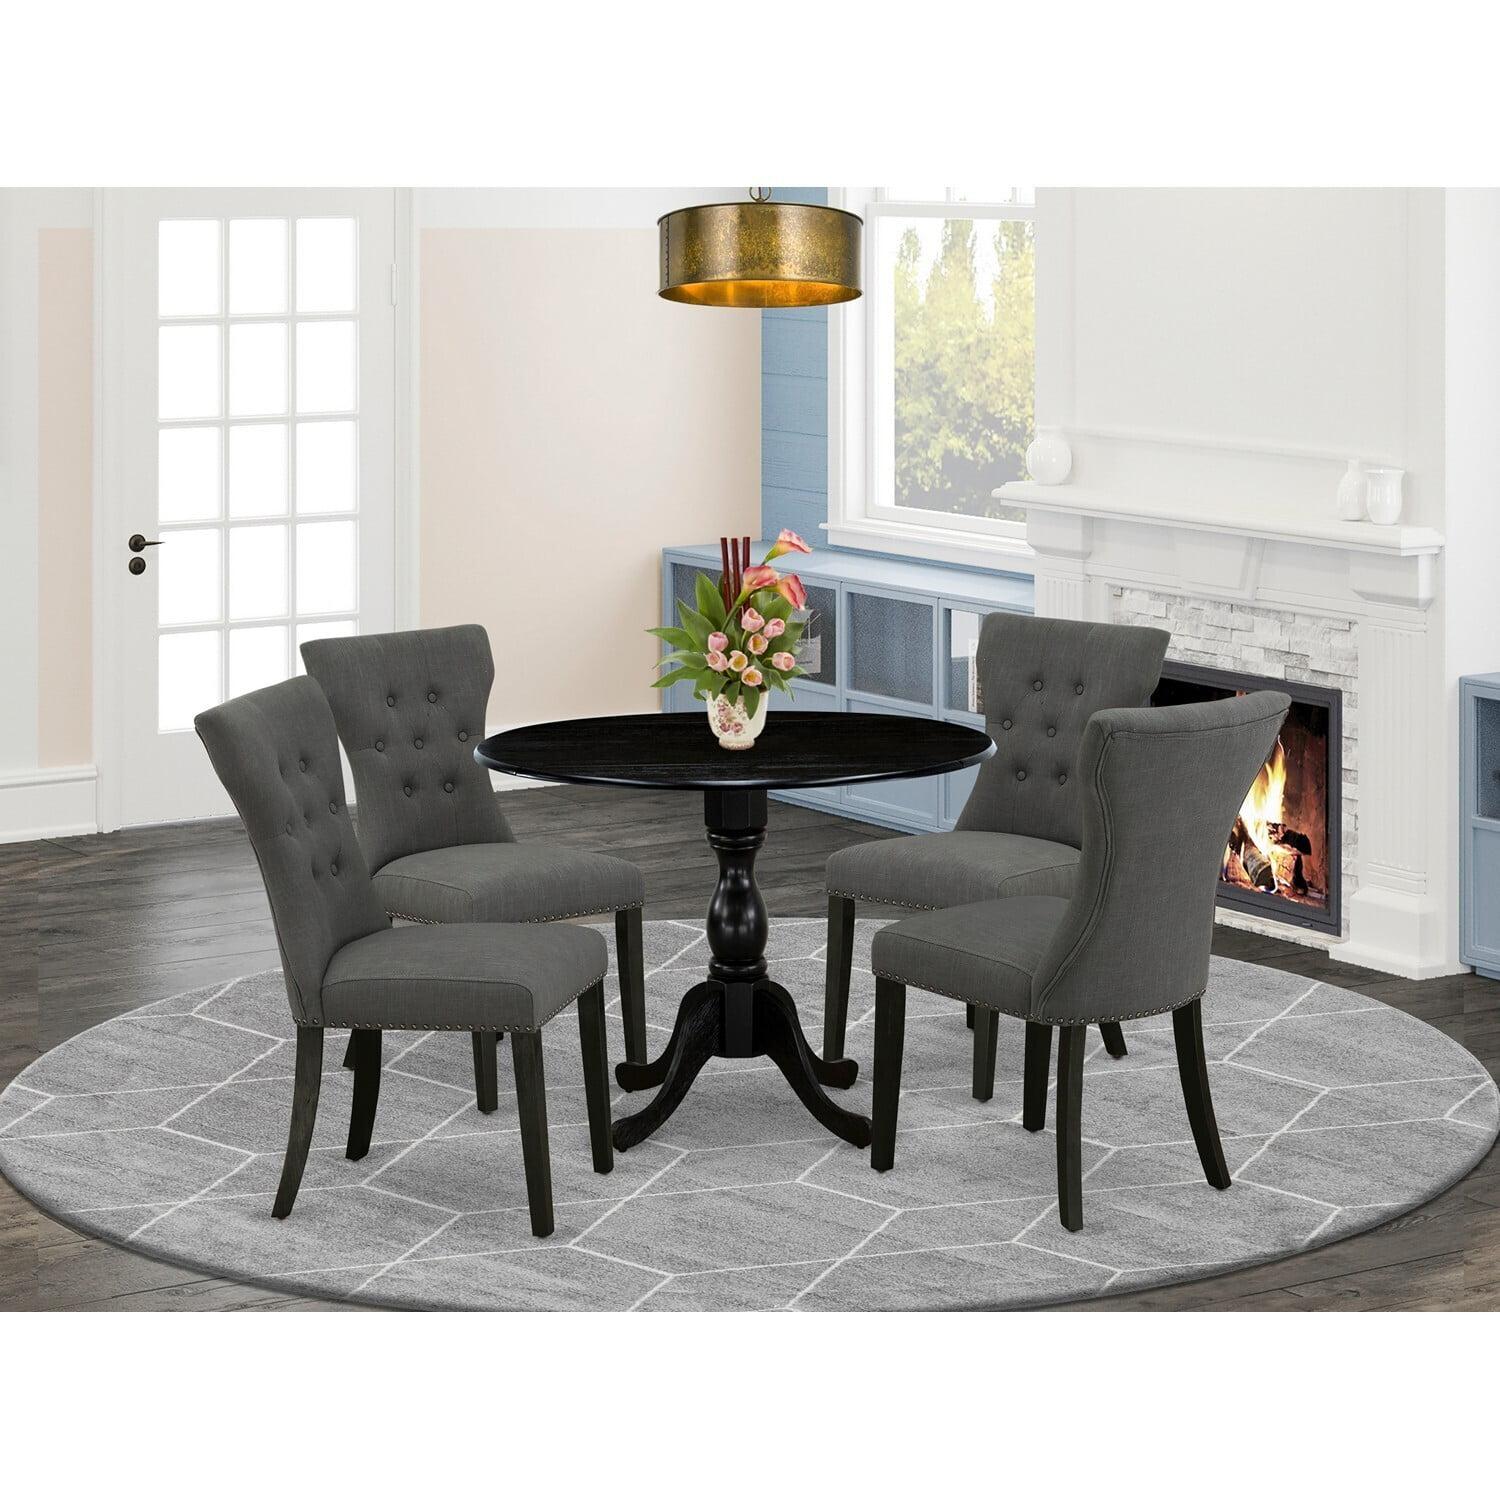 Gotham Grey Linen and Black Wire-Brushed 5-Piece Dining Set